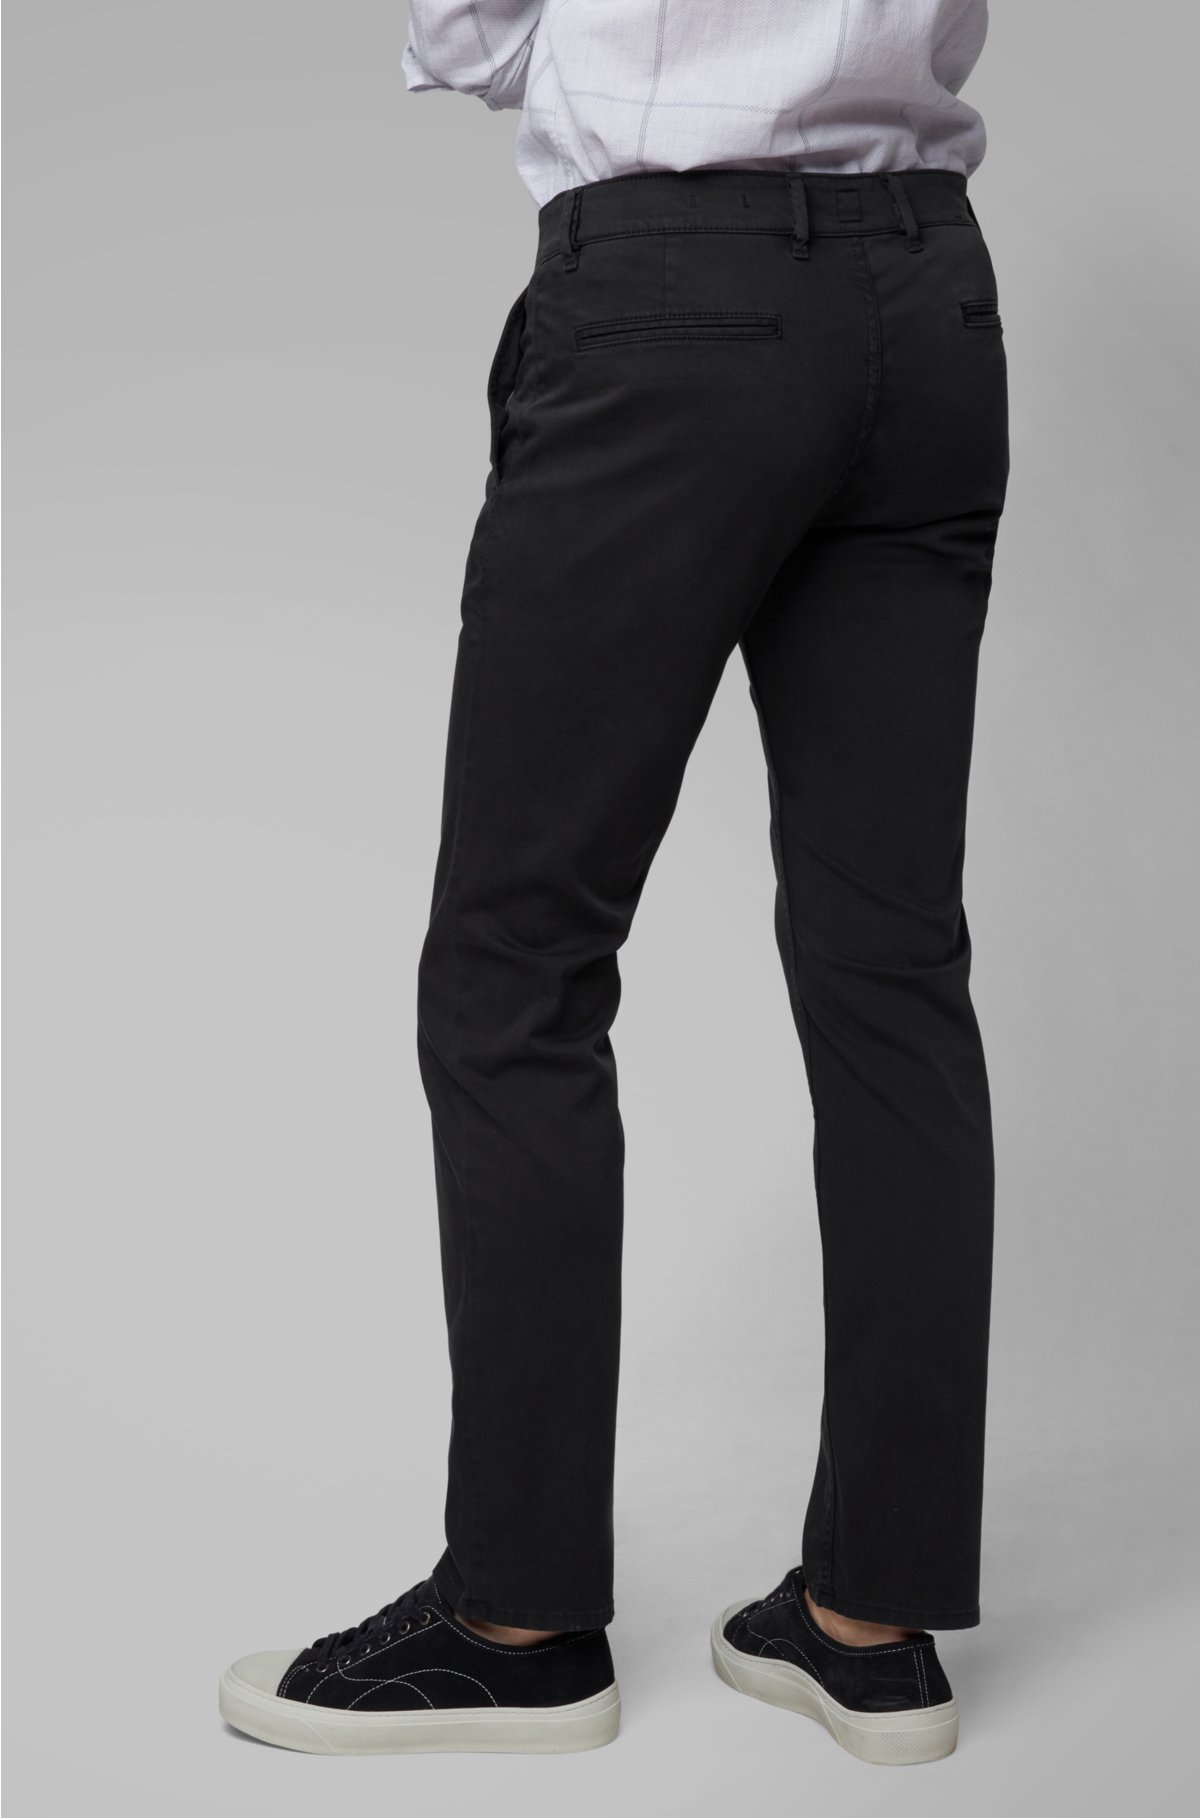 casual BOSS chinos - Slim-fit in brushed stretch cotton